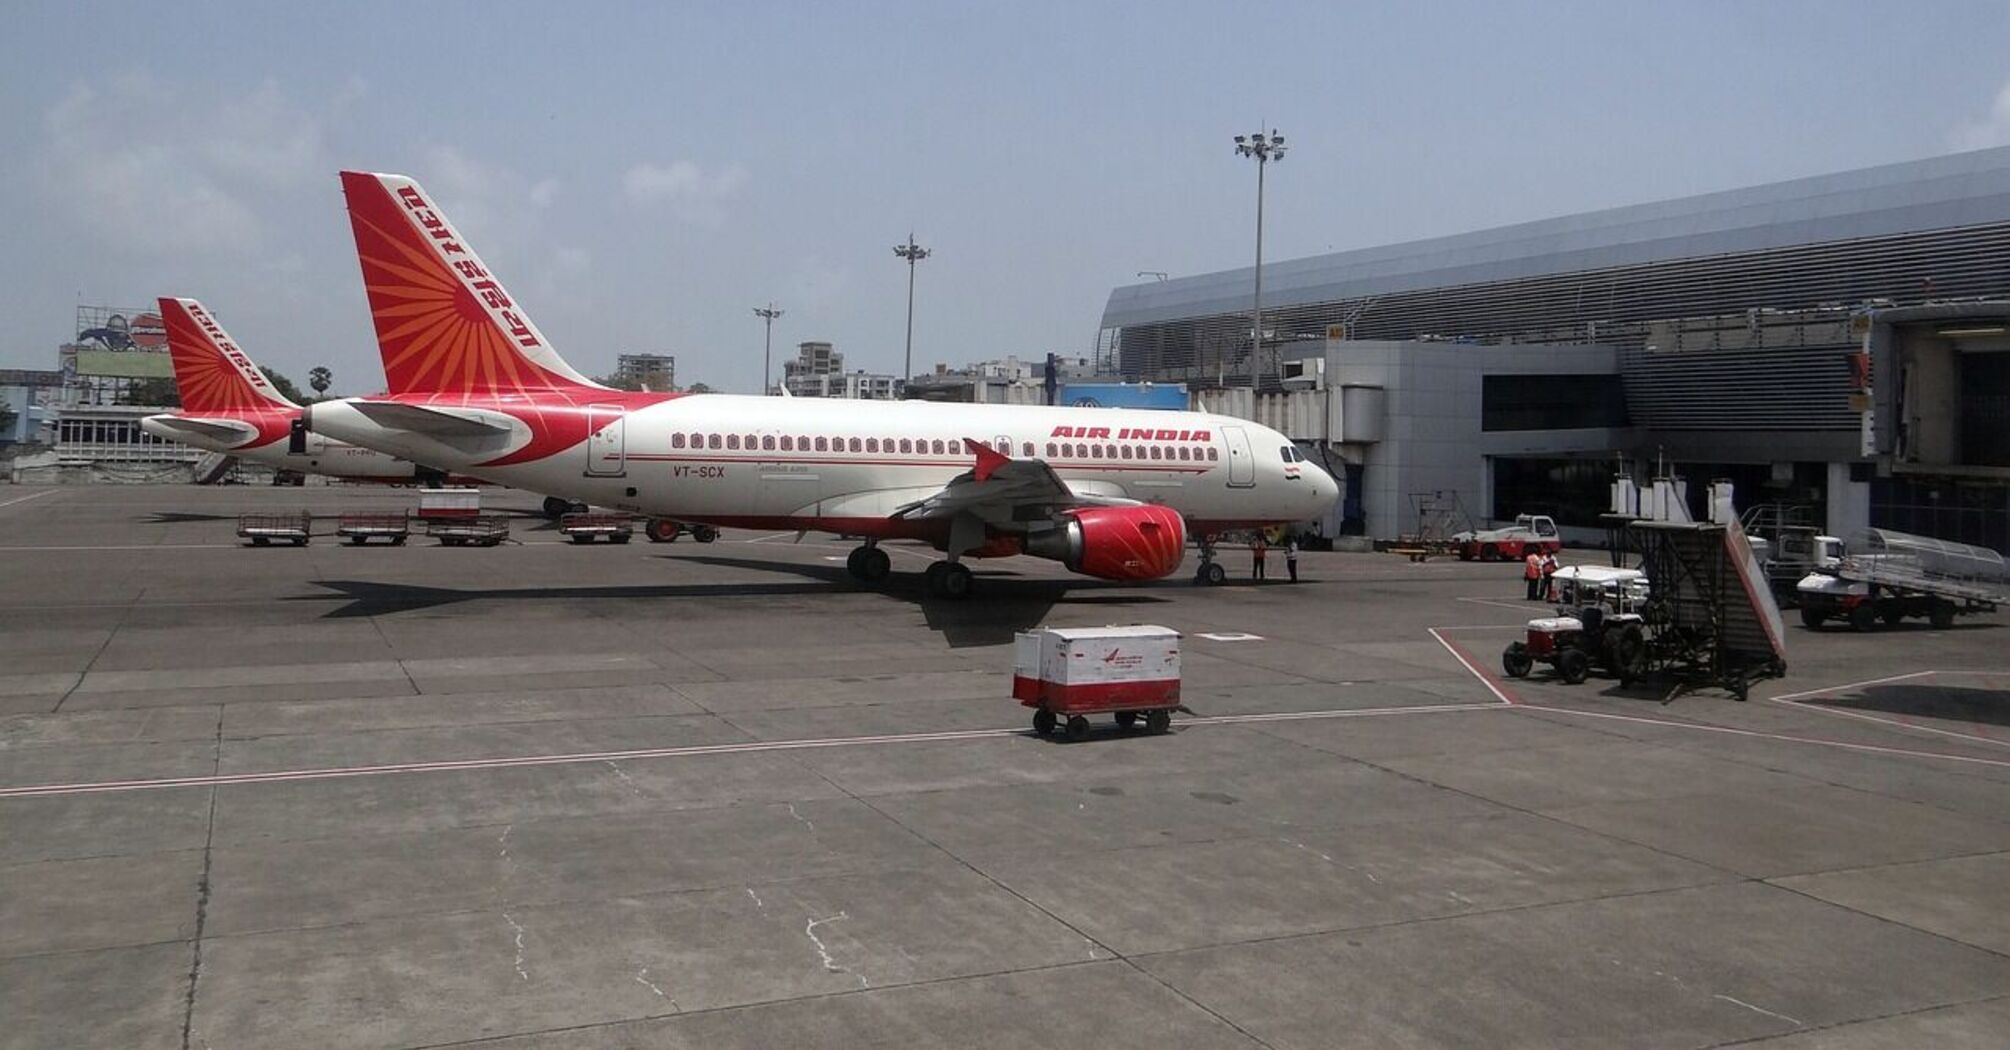 Air India became the first Indian airline to introduce self-baggage drop-off on international flights